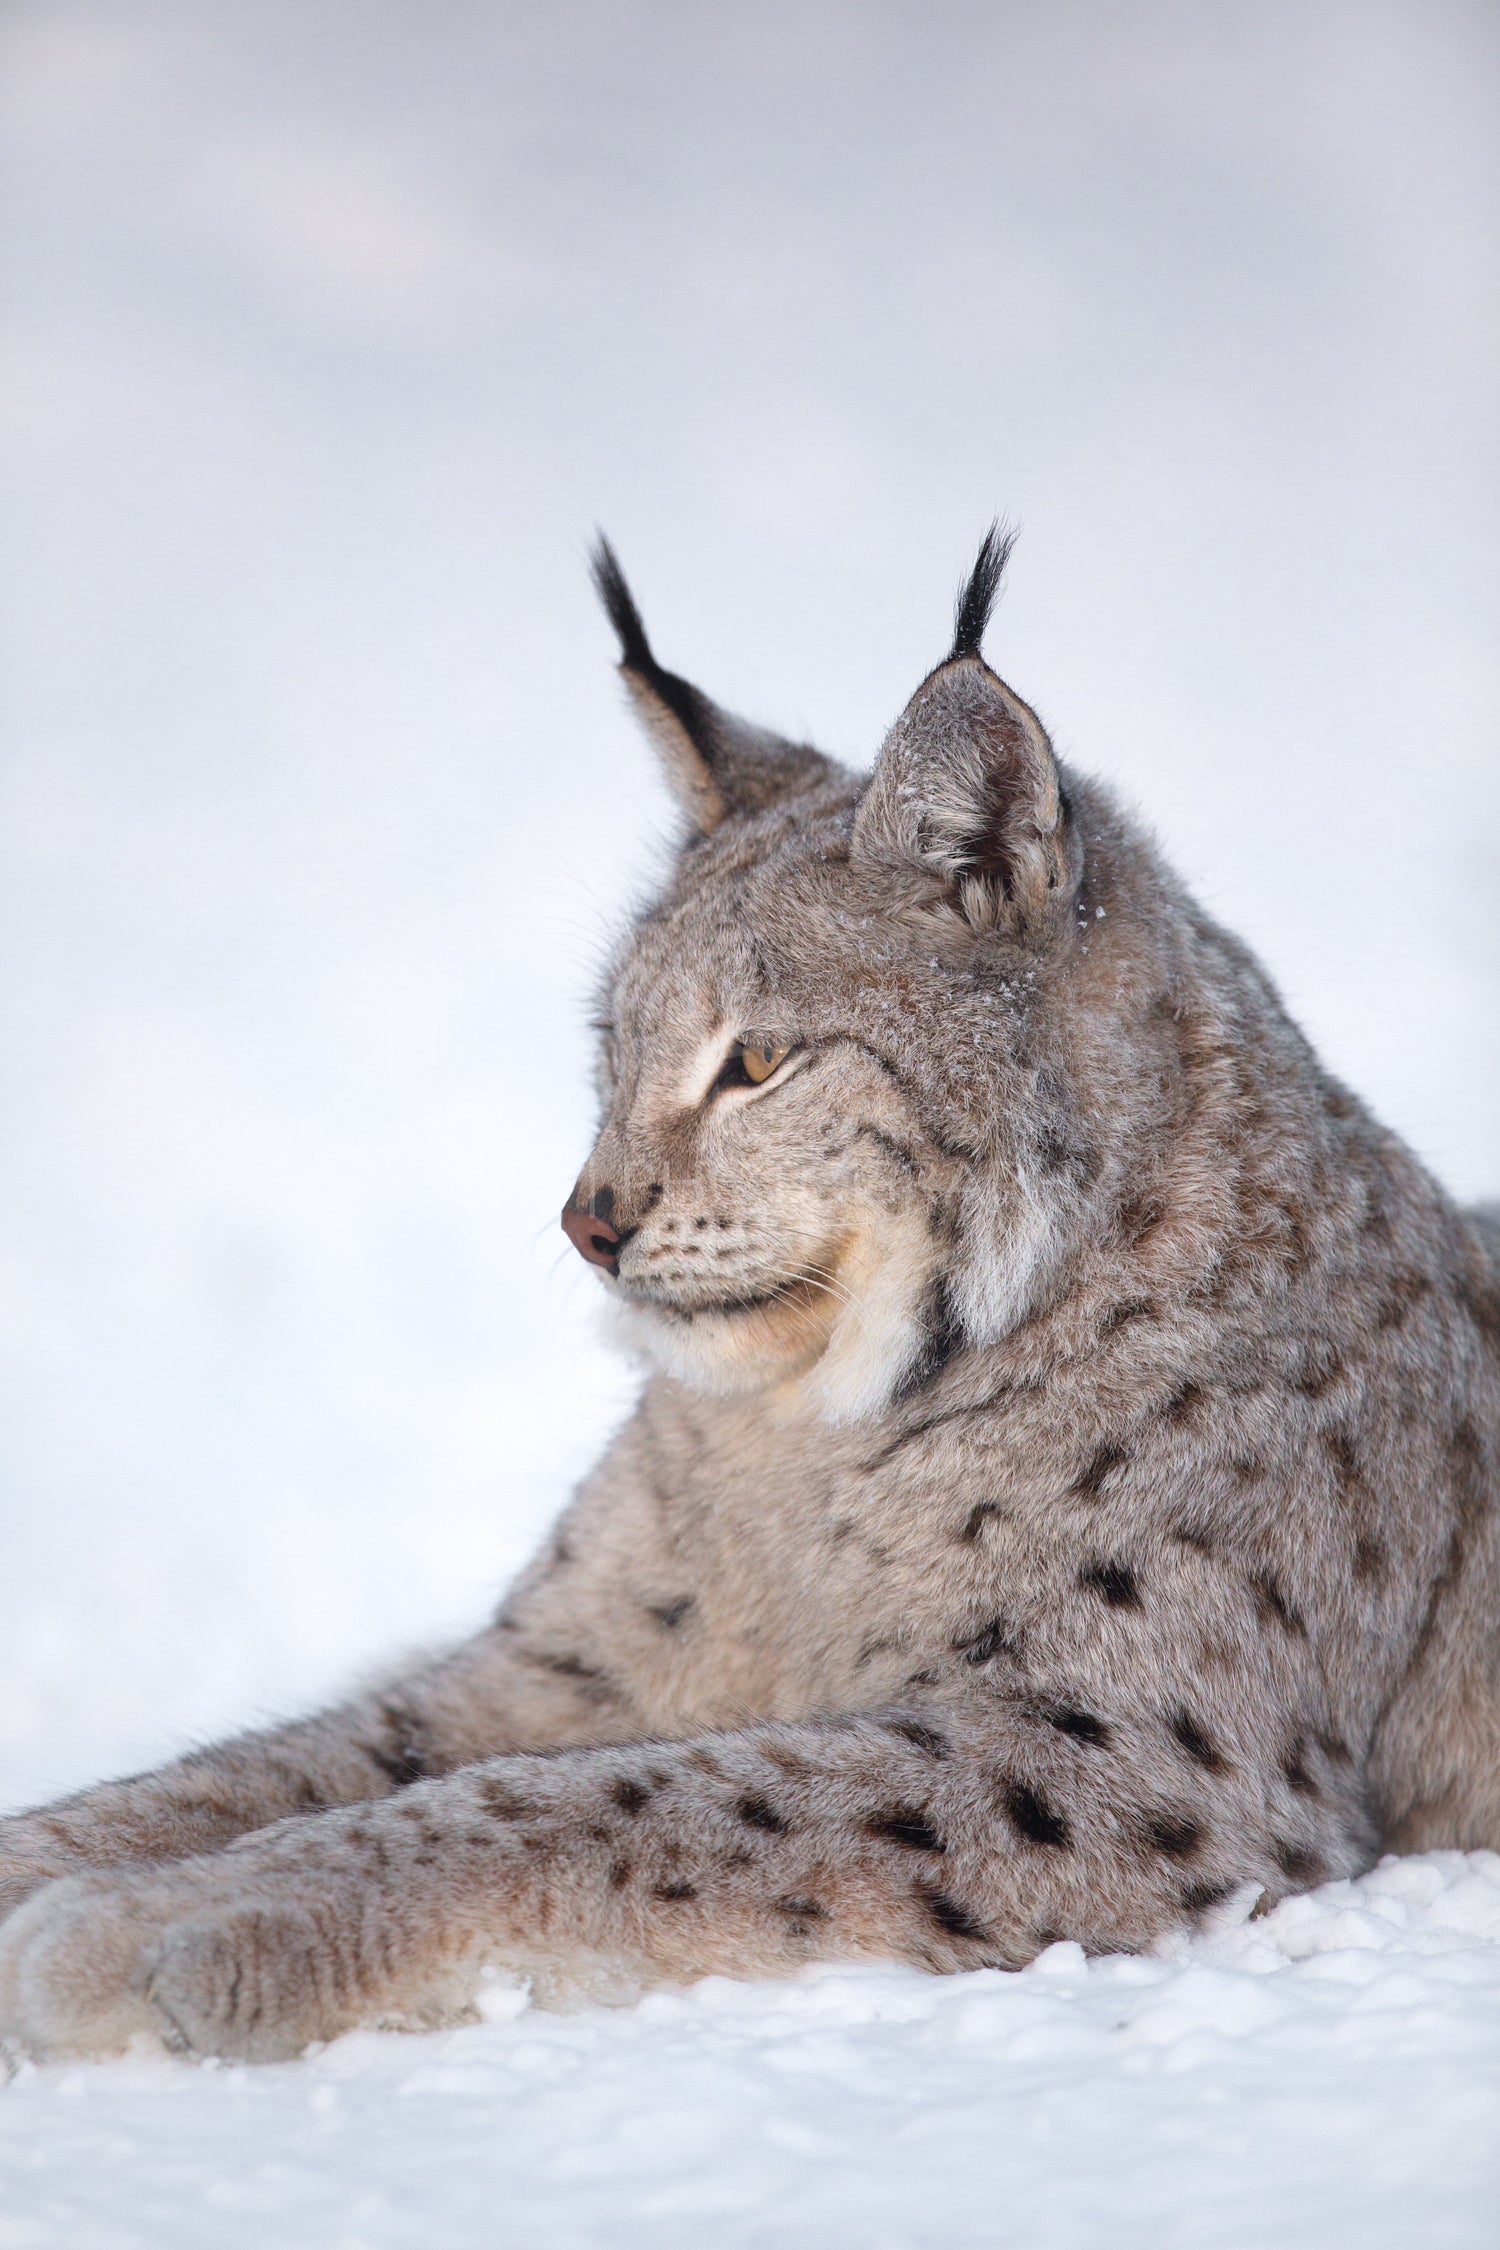 Lynx rests in the snow